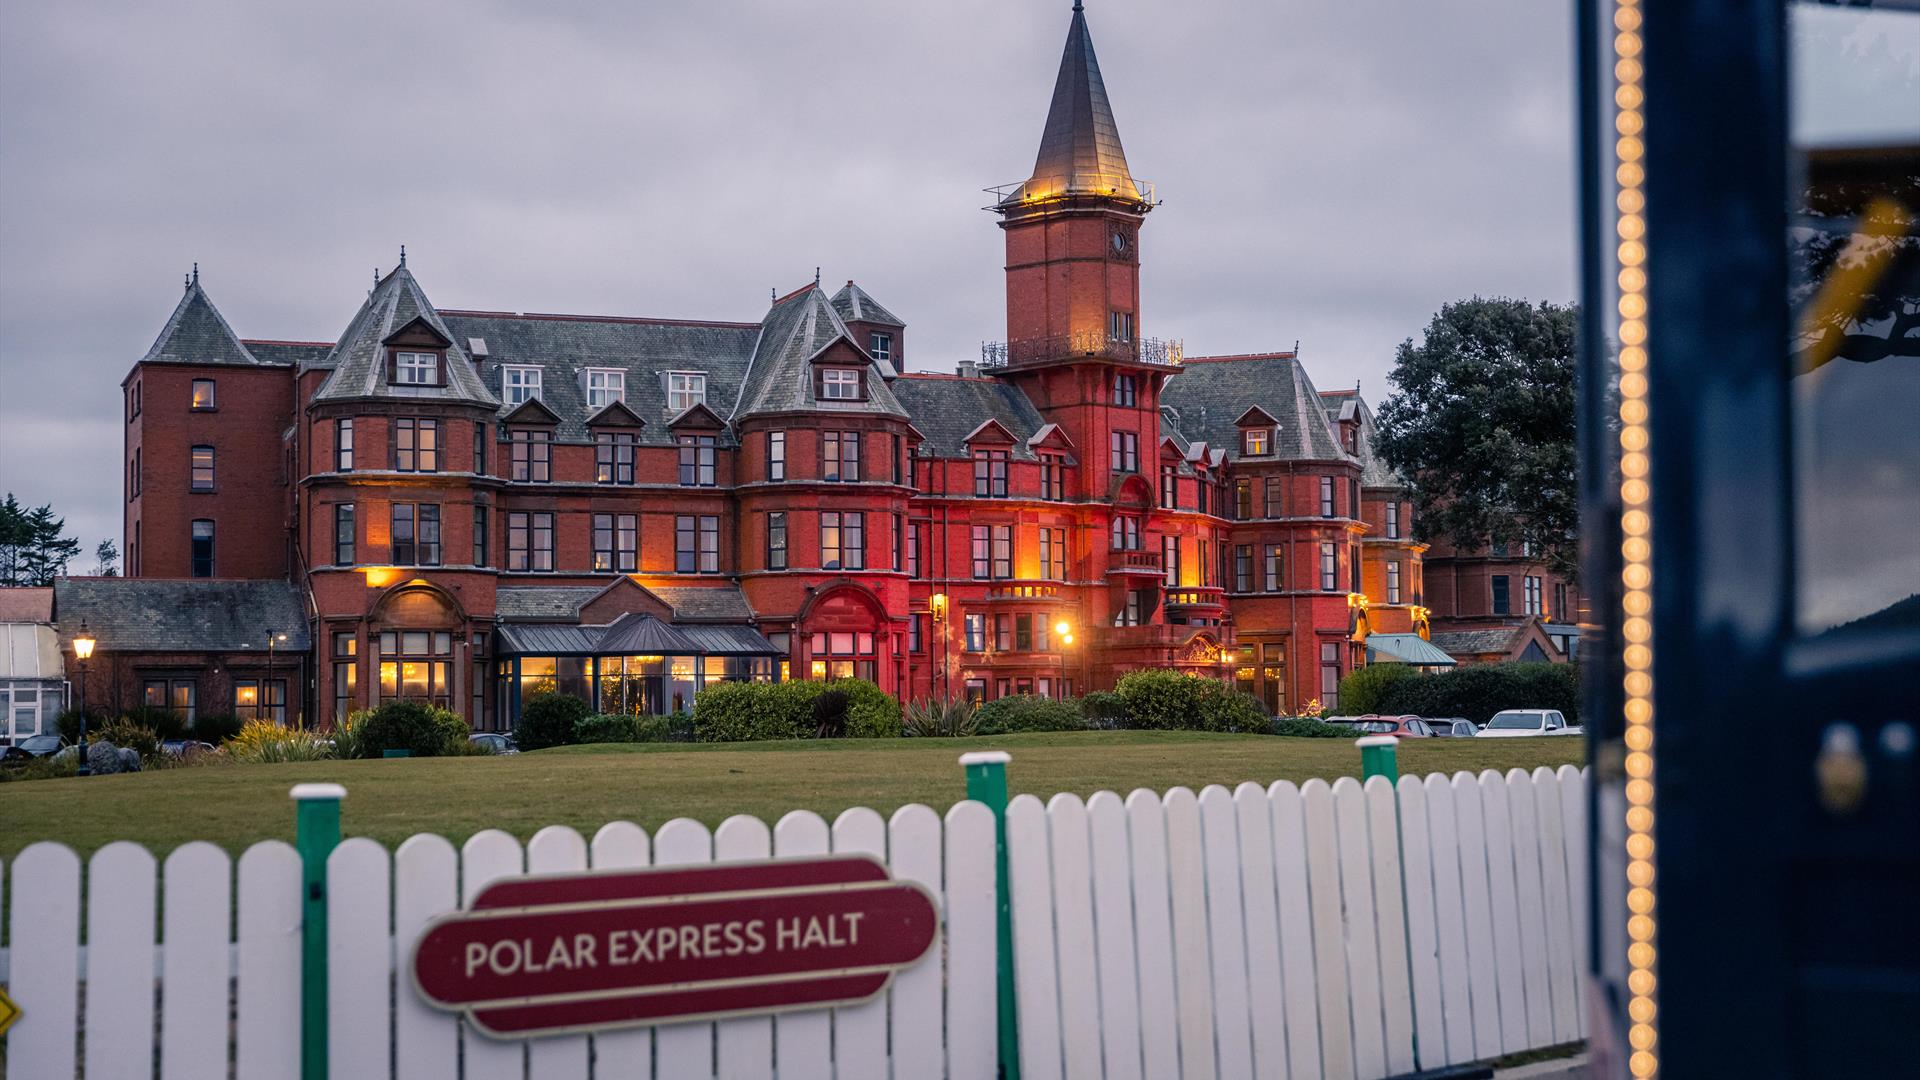 Exterior of Slieve Donard with a Polar Express sign and train.